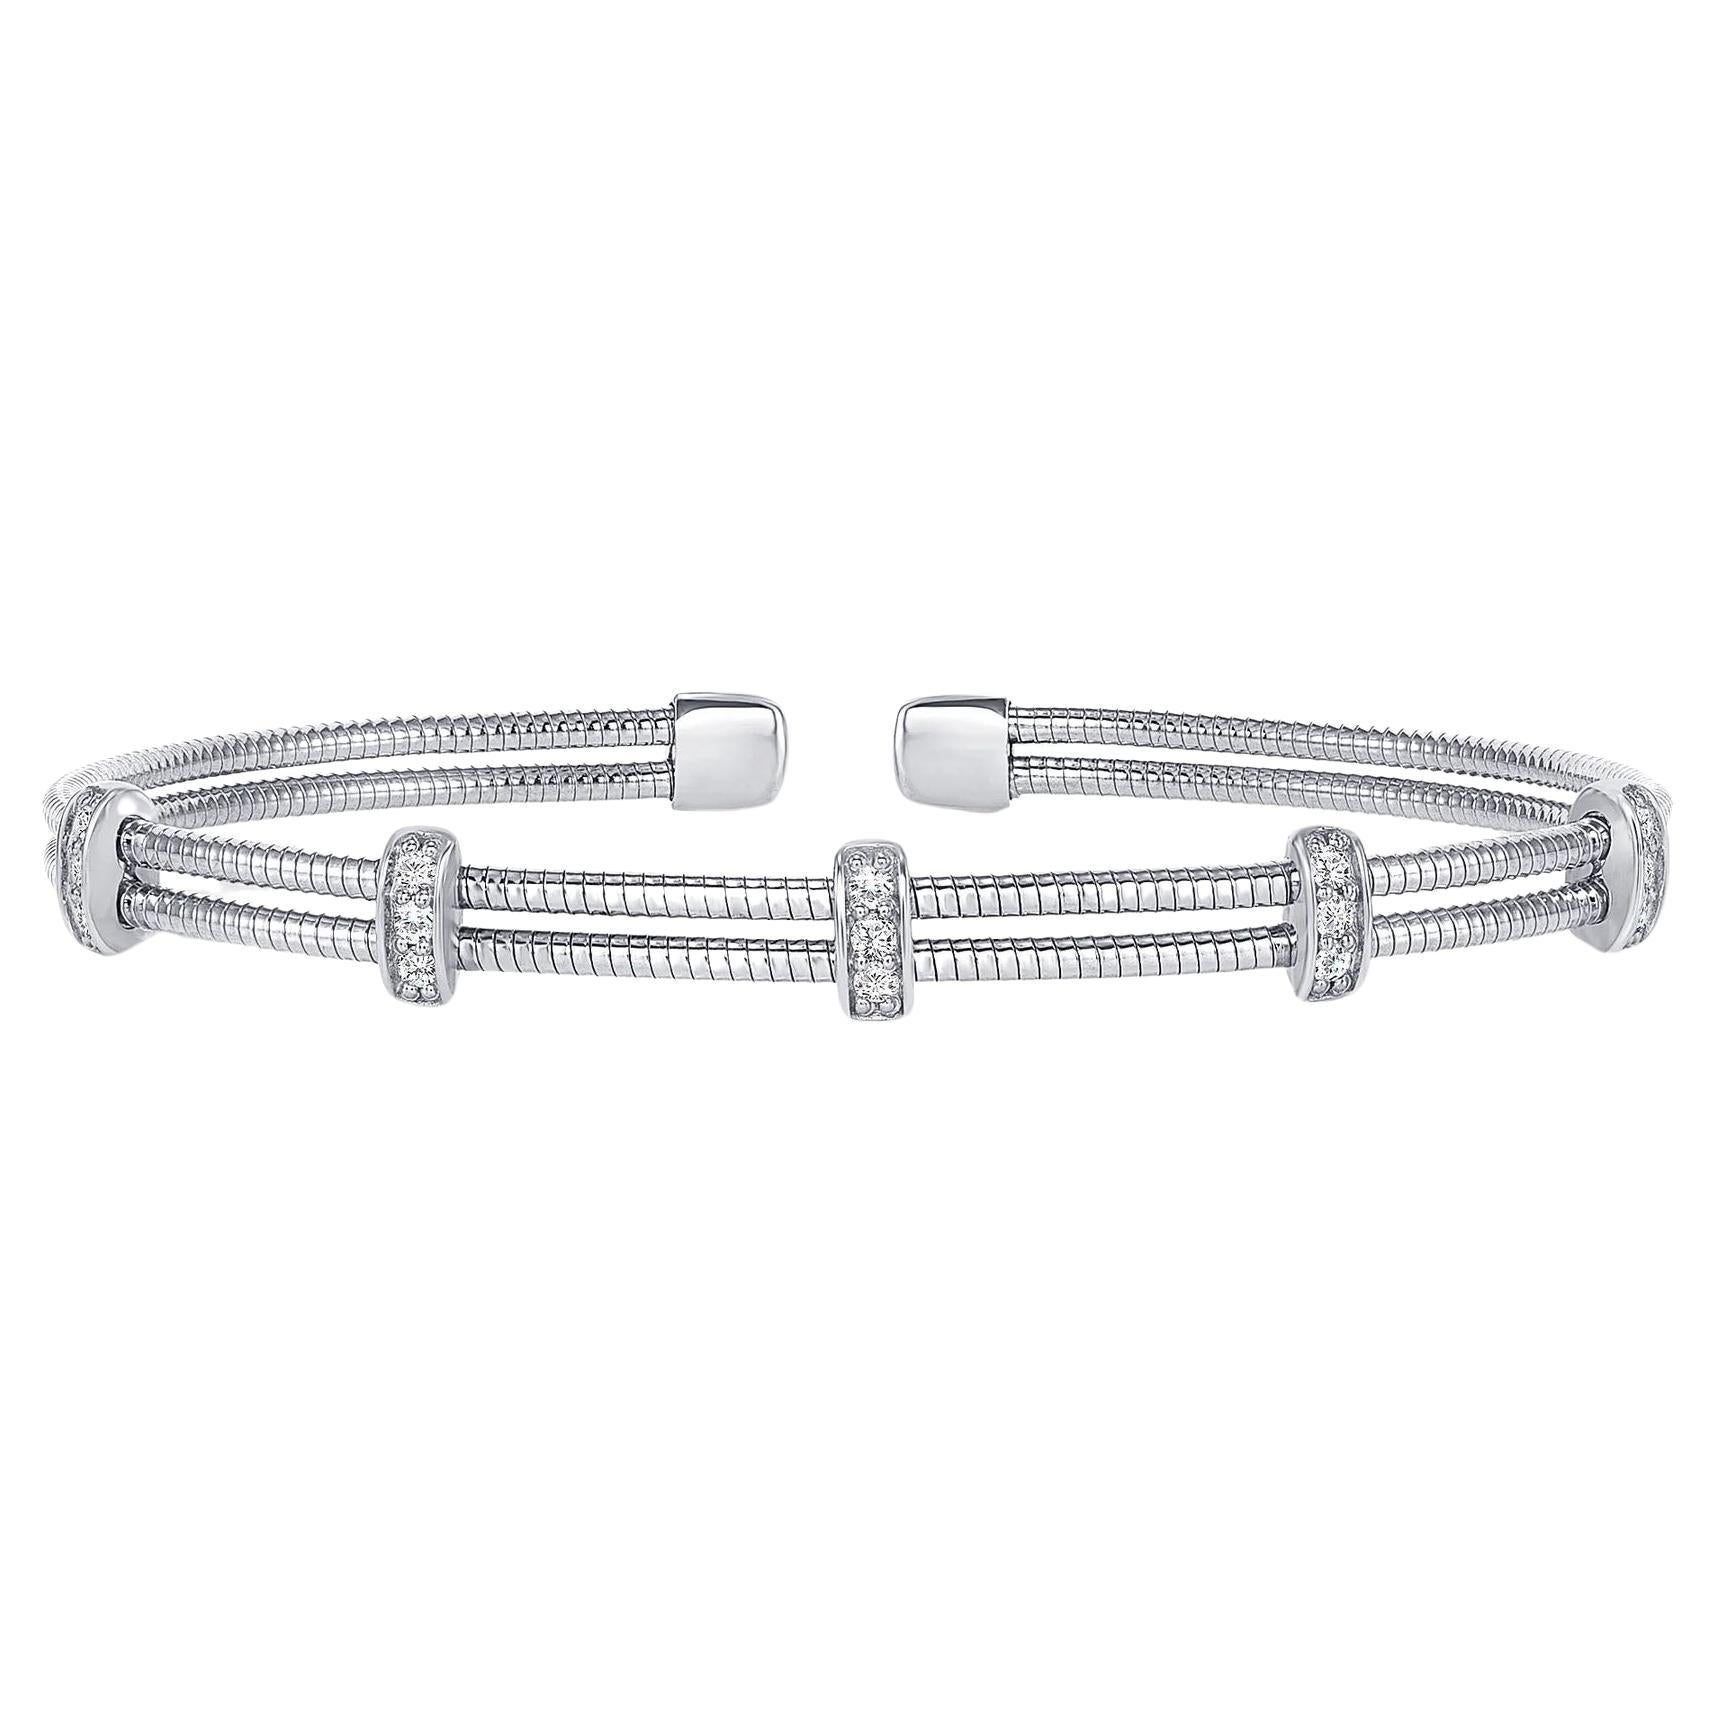 This diamond tennis bangle features beautifully cut round diamonds in pave setting. Great gift option for Anniversary, Birthday, Valentine's, Graduation, Holiday.

Bracelet Information
Metal : 14k Gold, 18k Gold, Platinum
Diamond Cut : Round Natural